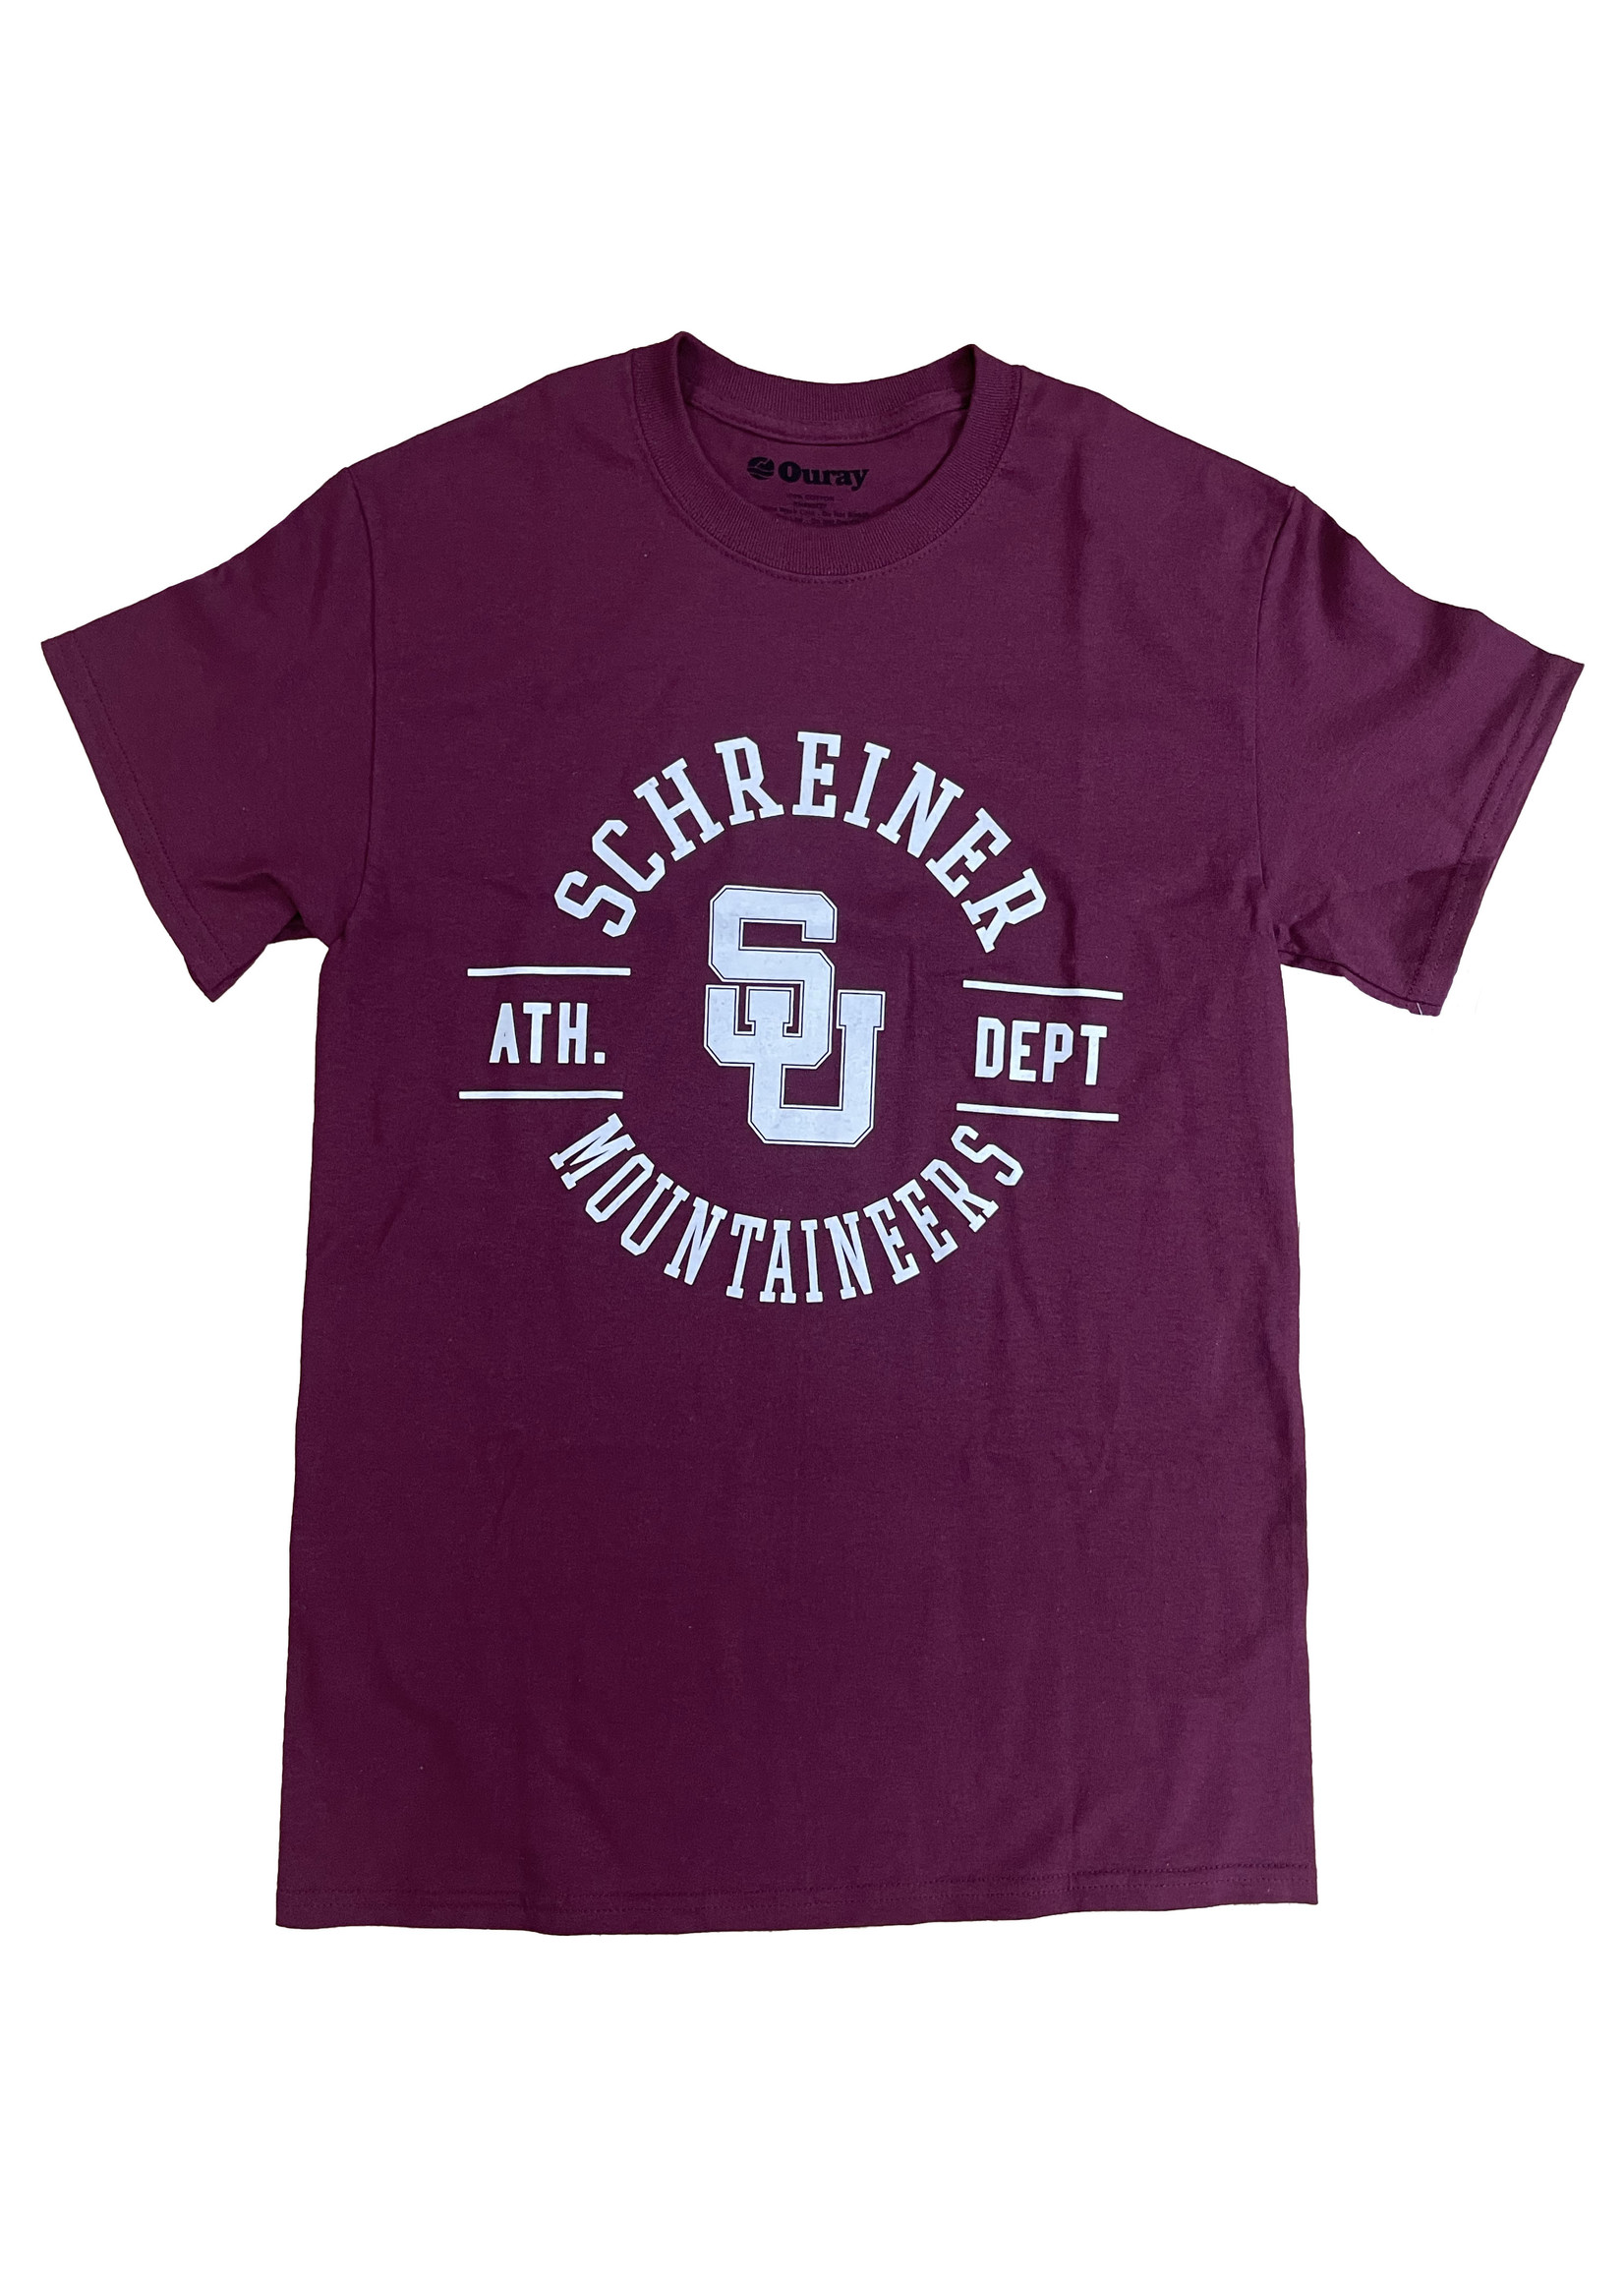 Ouray Sportswear Athletic Dept. Shirt